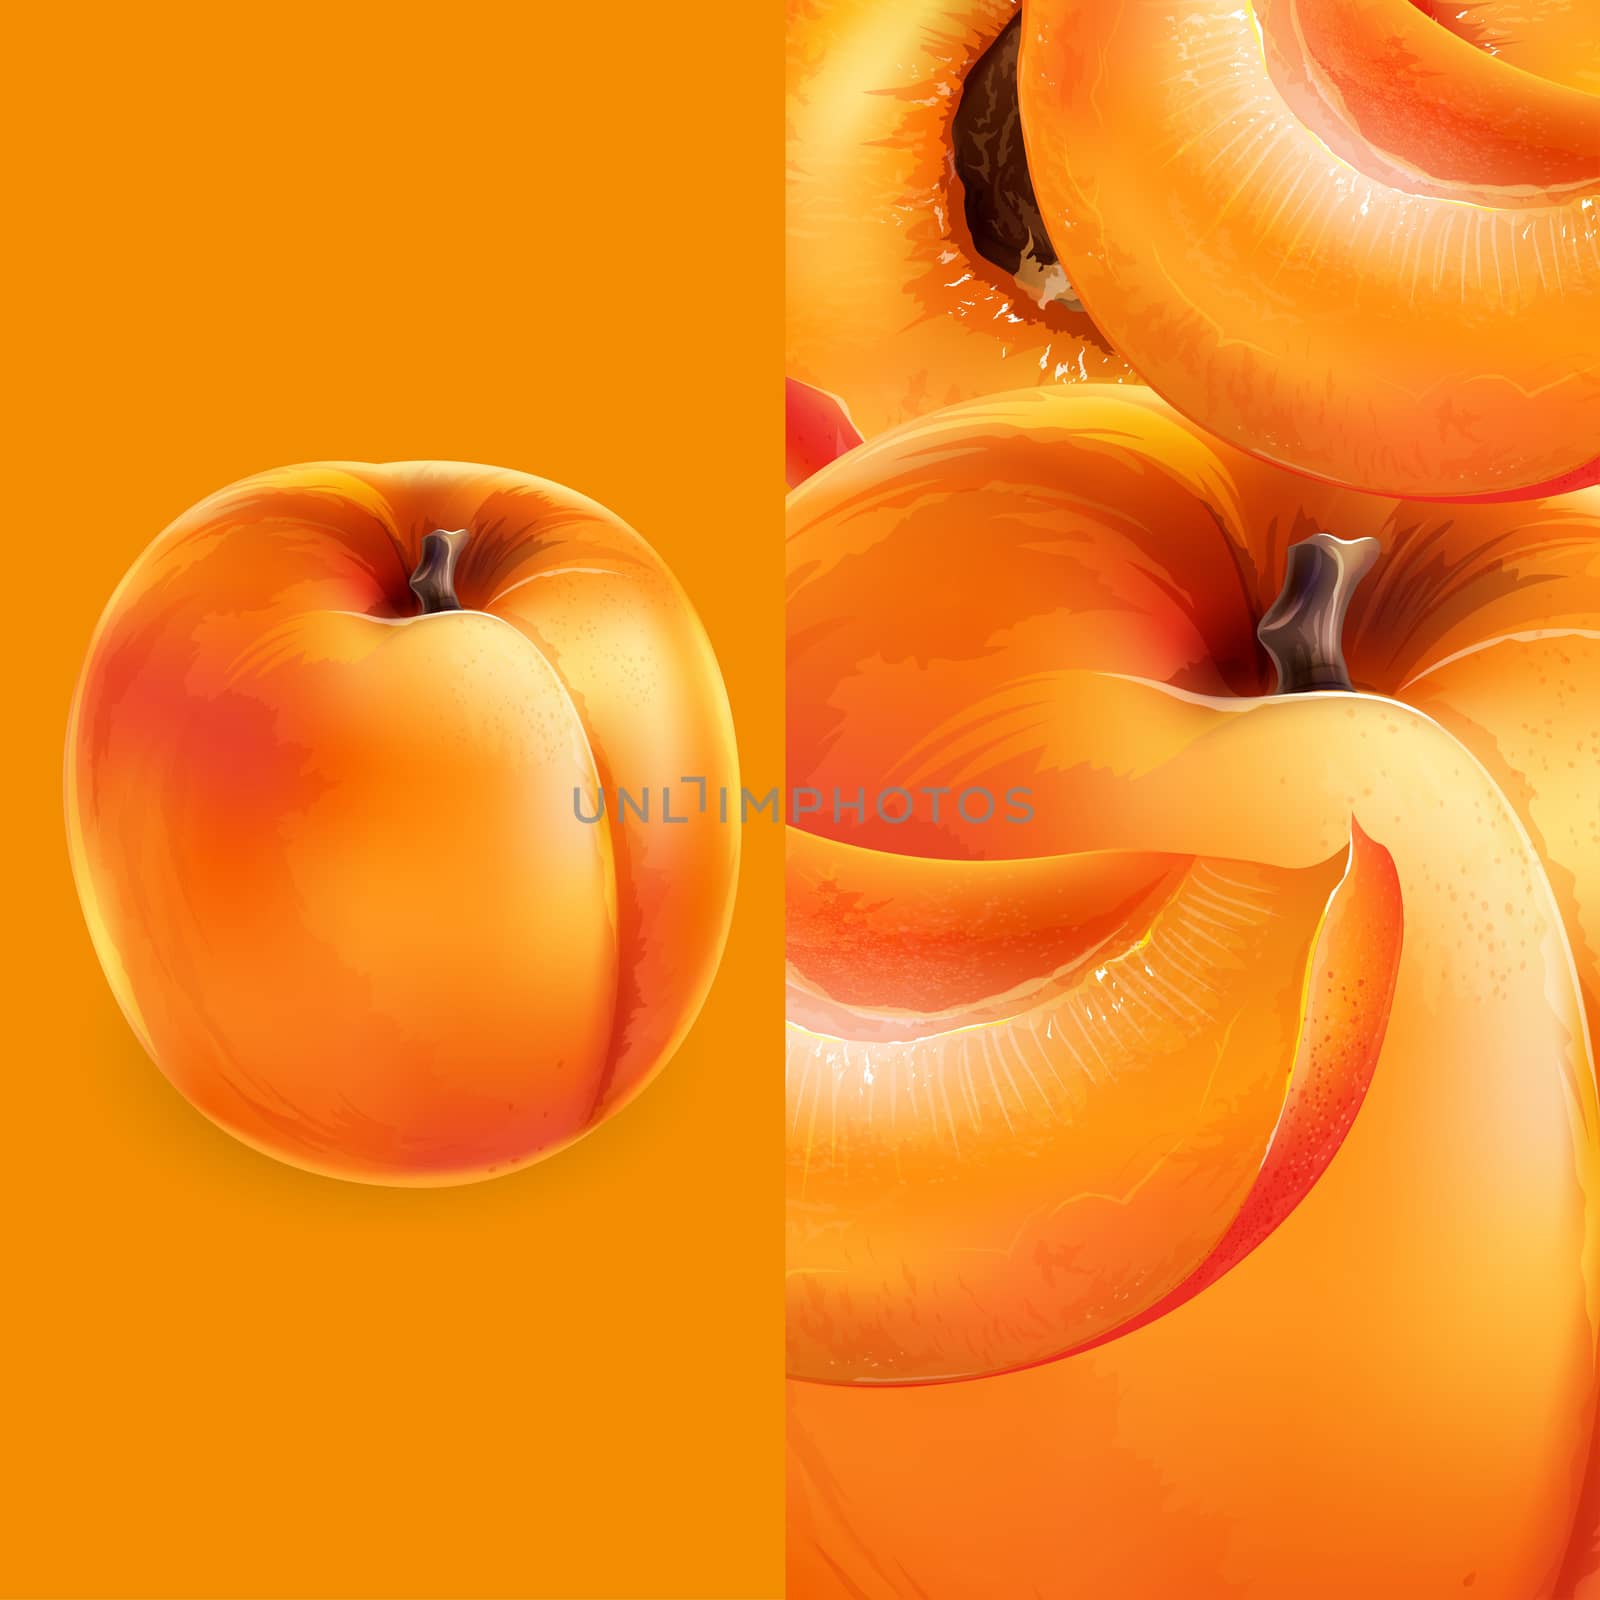 Apricot and cut slices on a bright orange background.